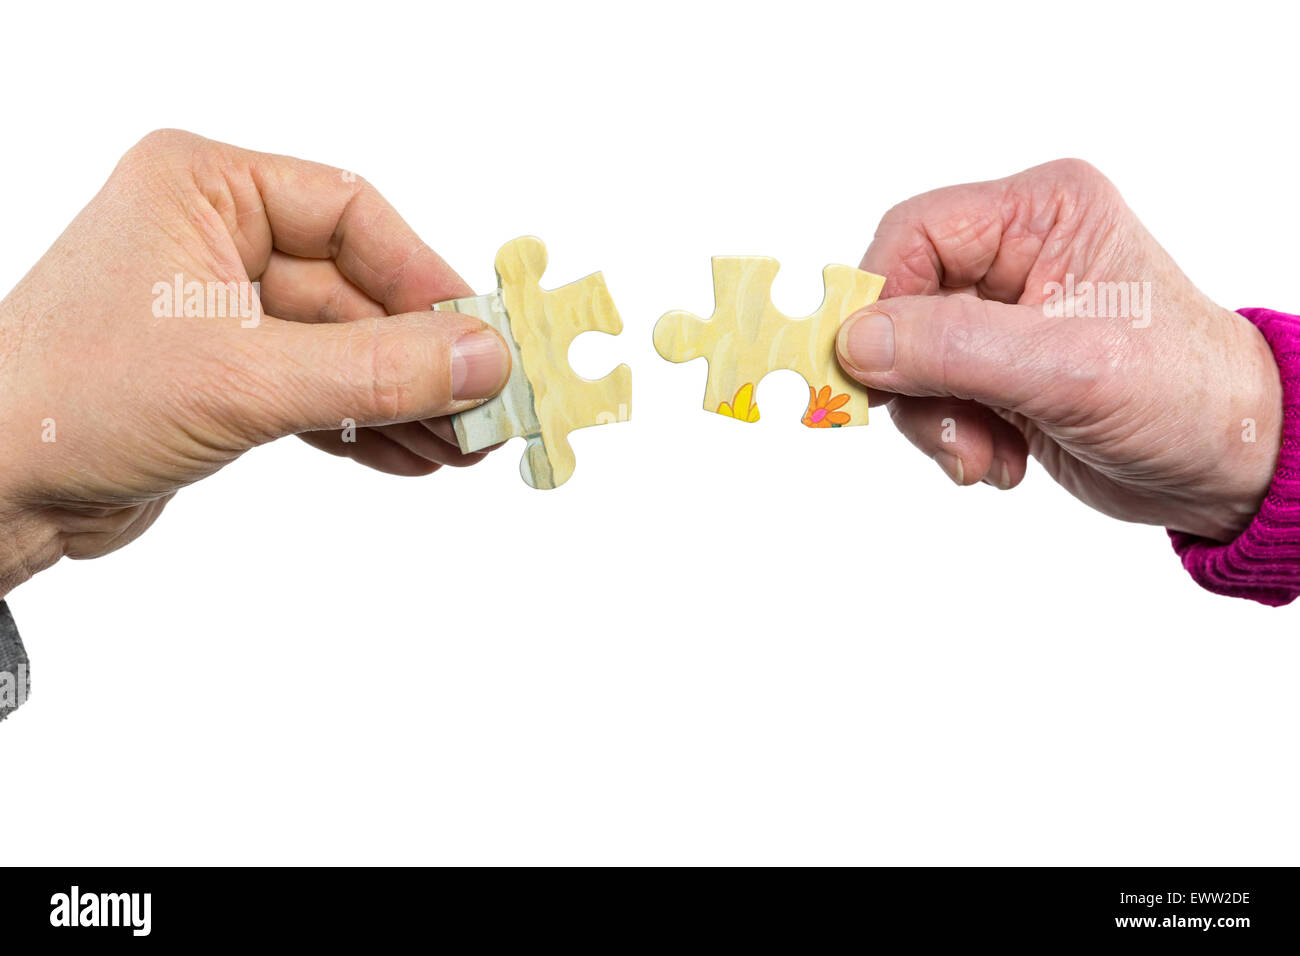 Two hands of man and woman joining uniting fitting puzzle pieces isolated on white background Stock Photo